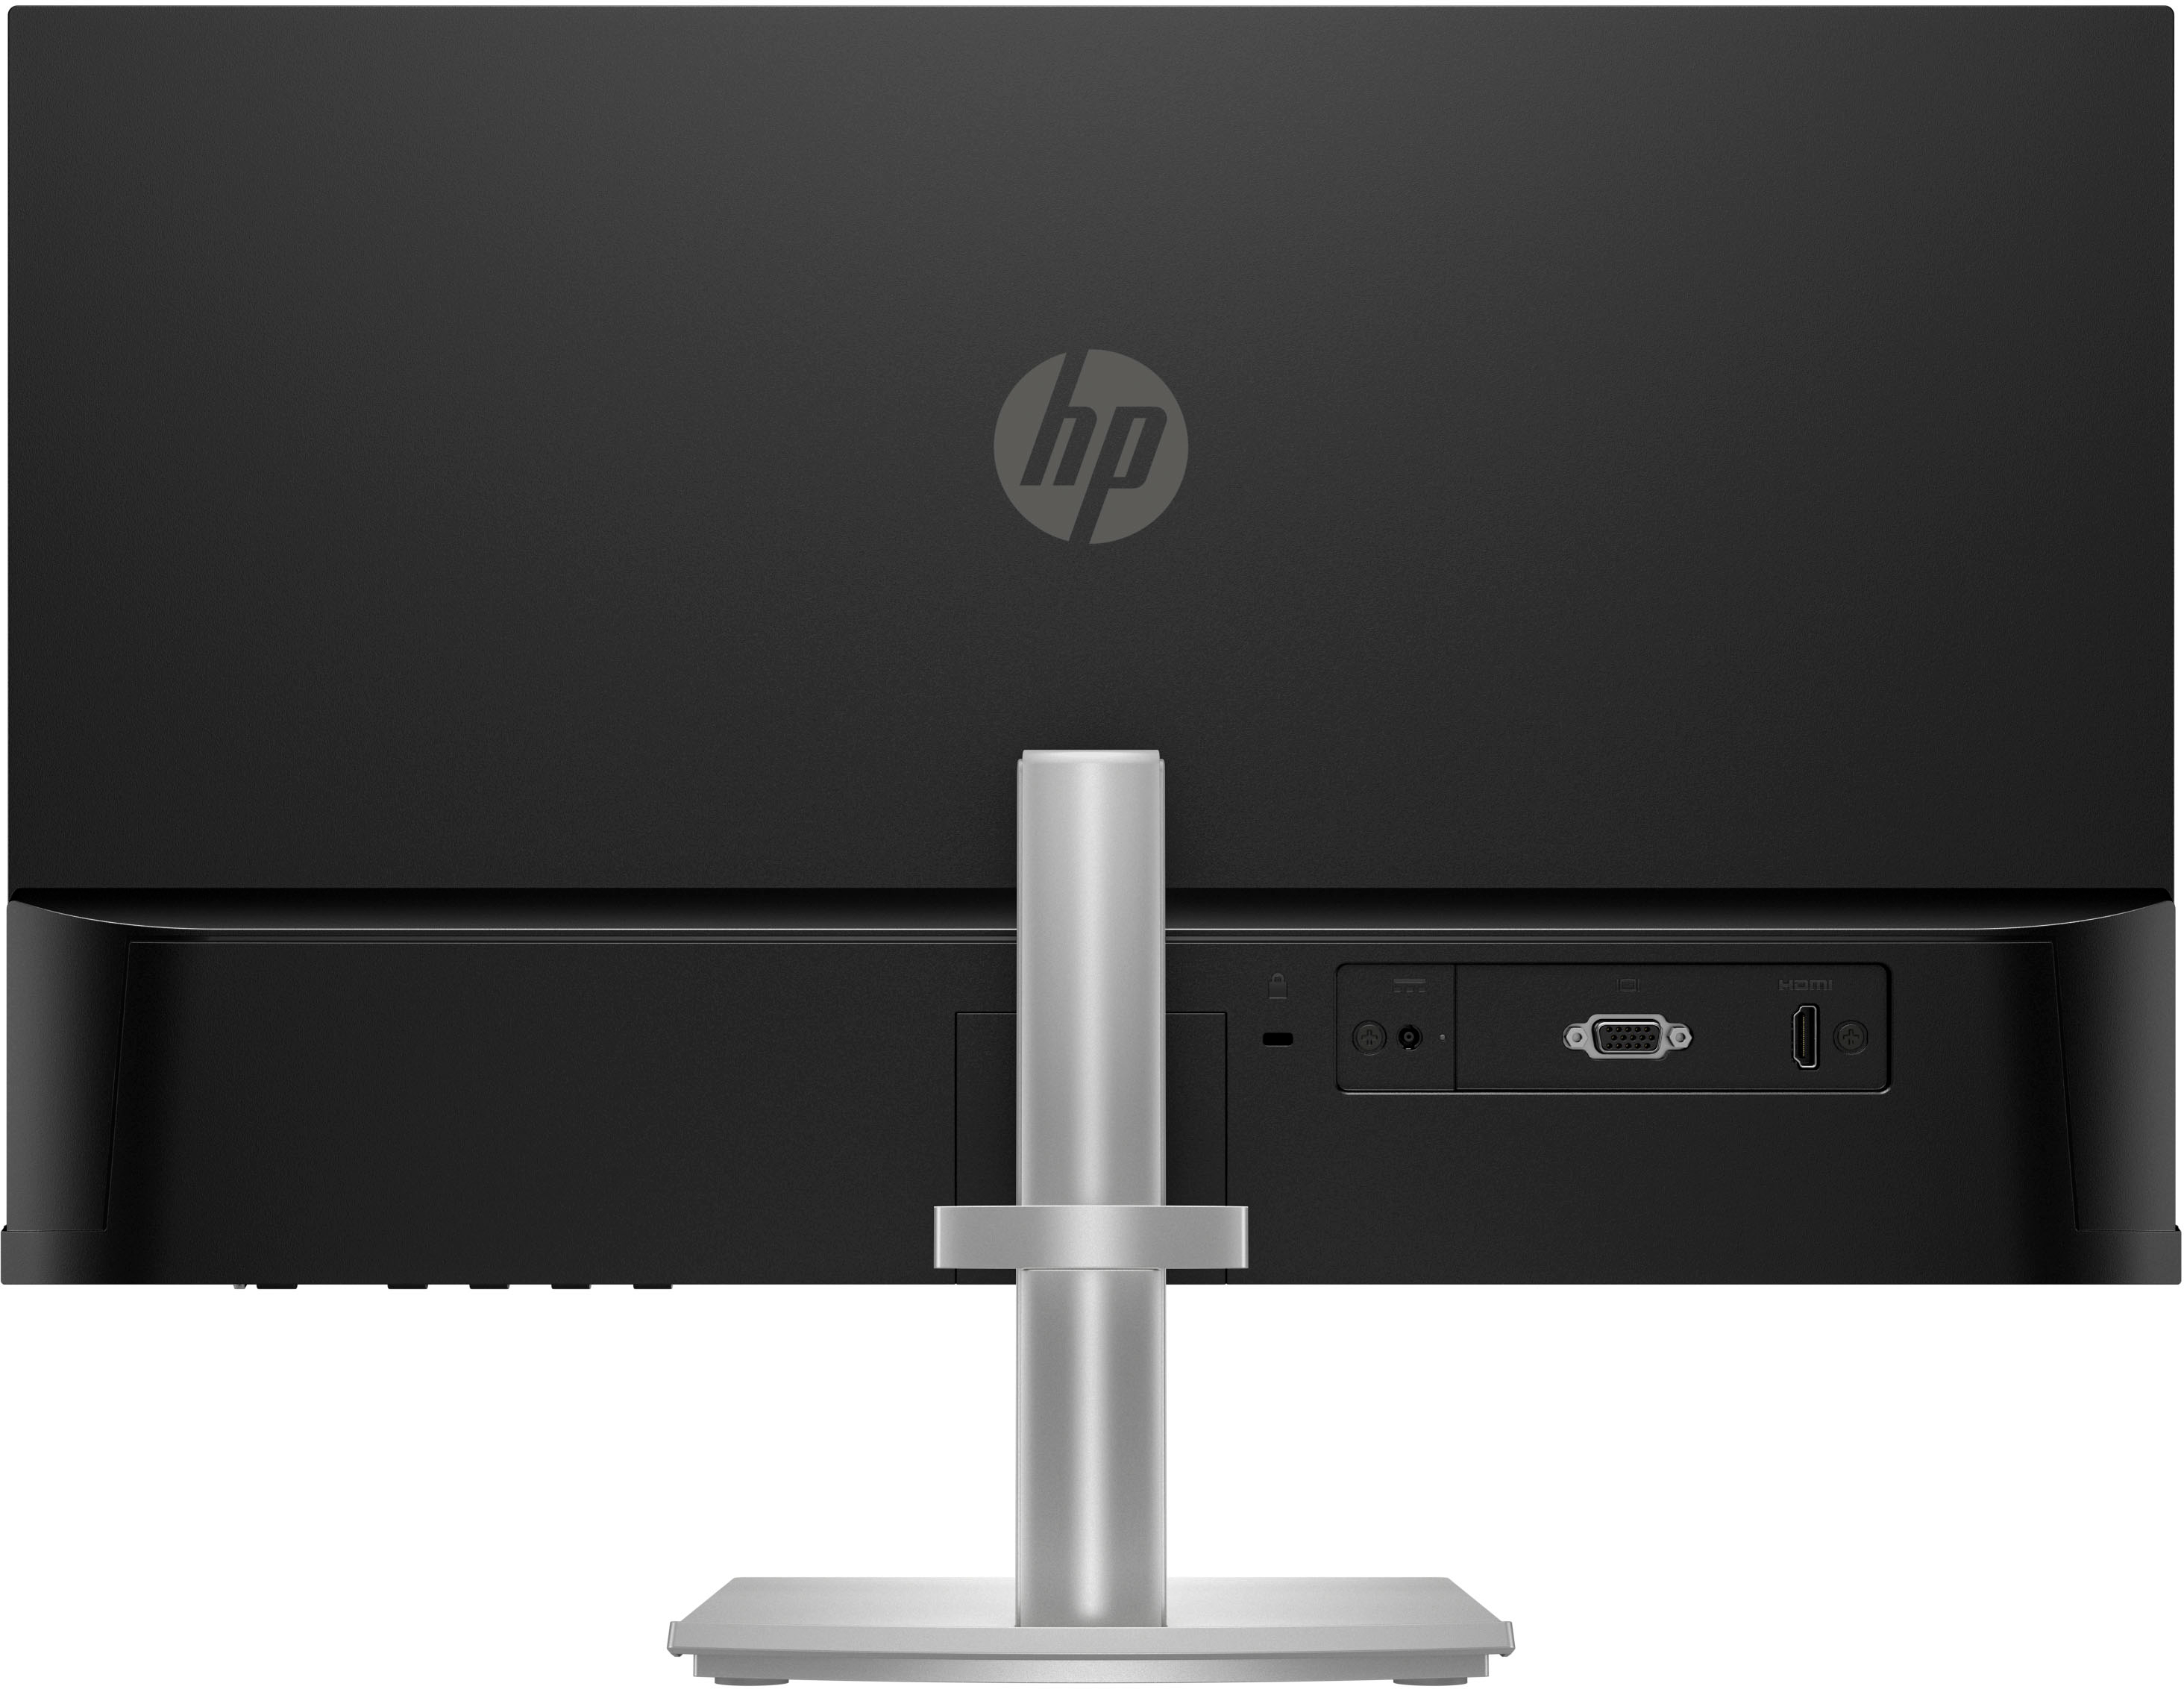 HP 24 IPS LED FHD FreeSync Monitor with Adjustable Height (HDMI, VGA)  Silver & Black M24h - Best Buy